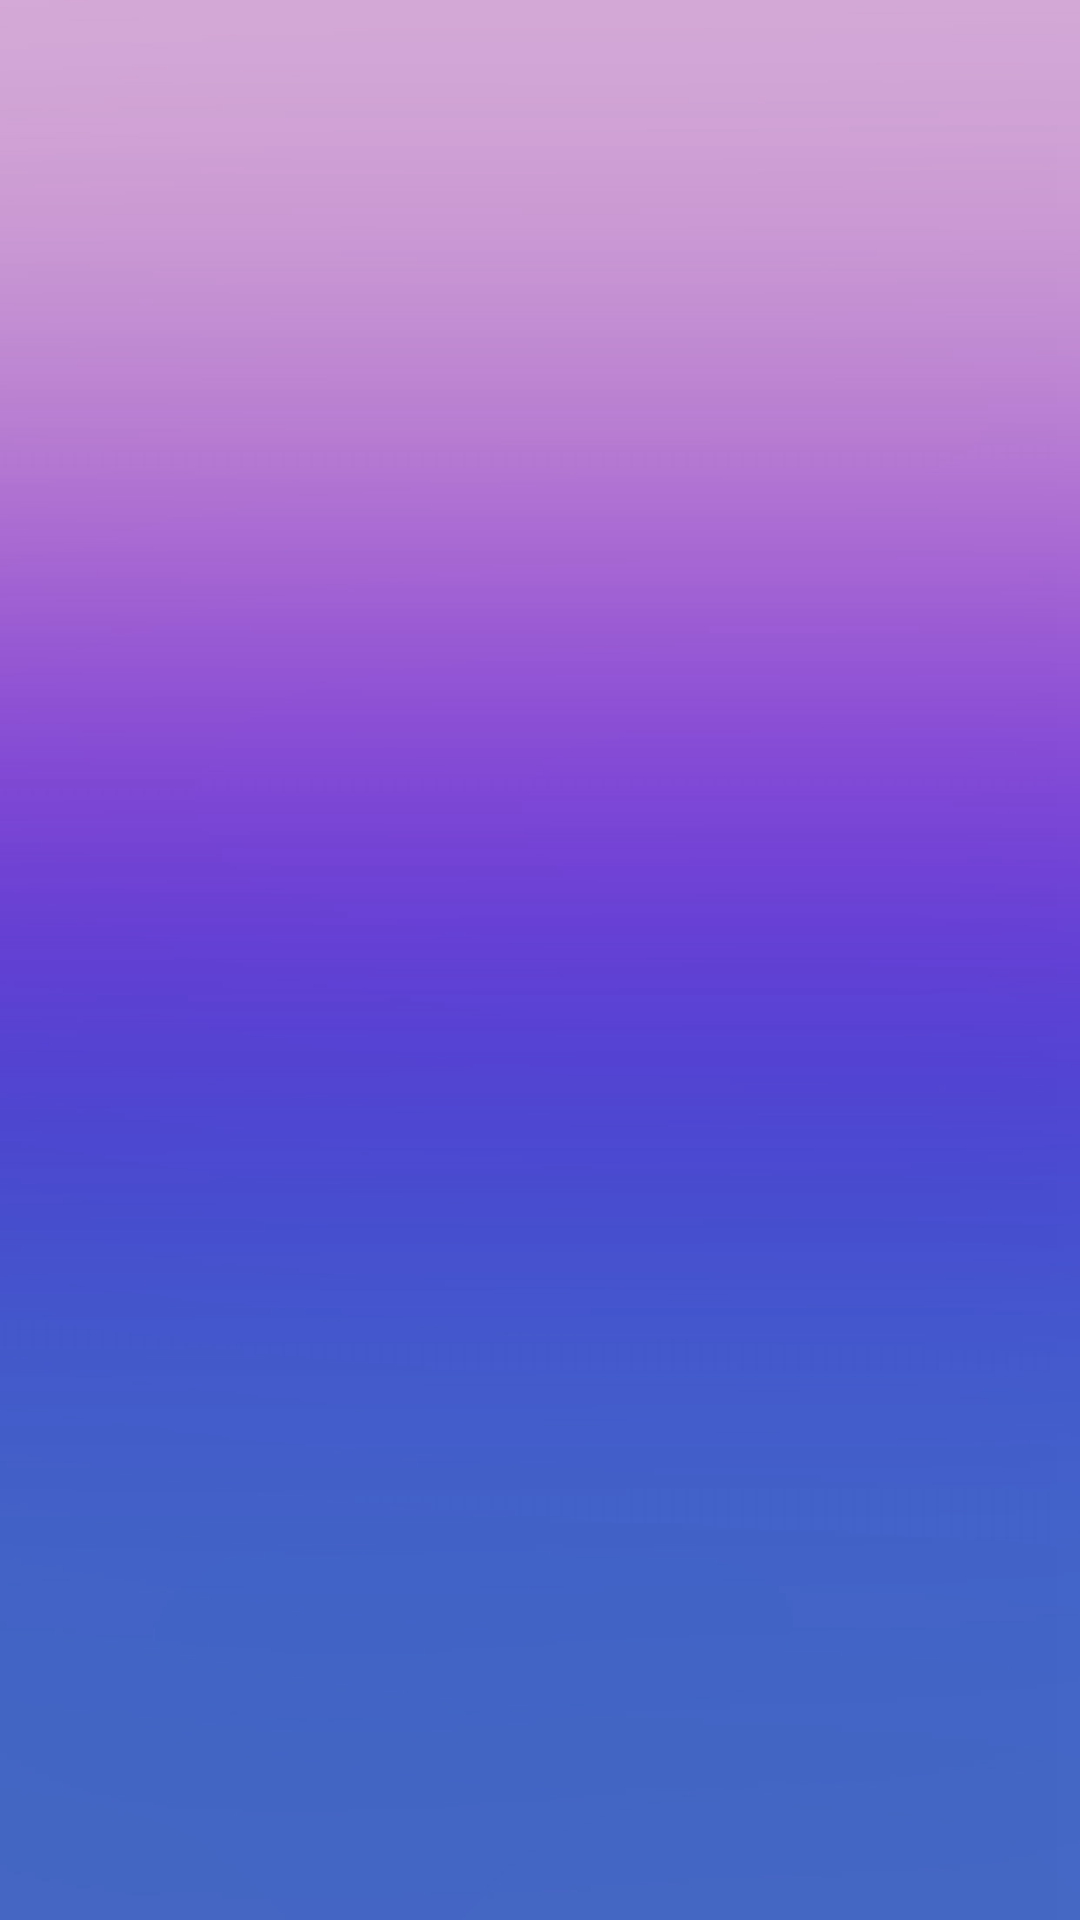 Blue And Purple Ombre Background - HD Wallpaper 